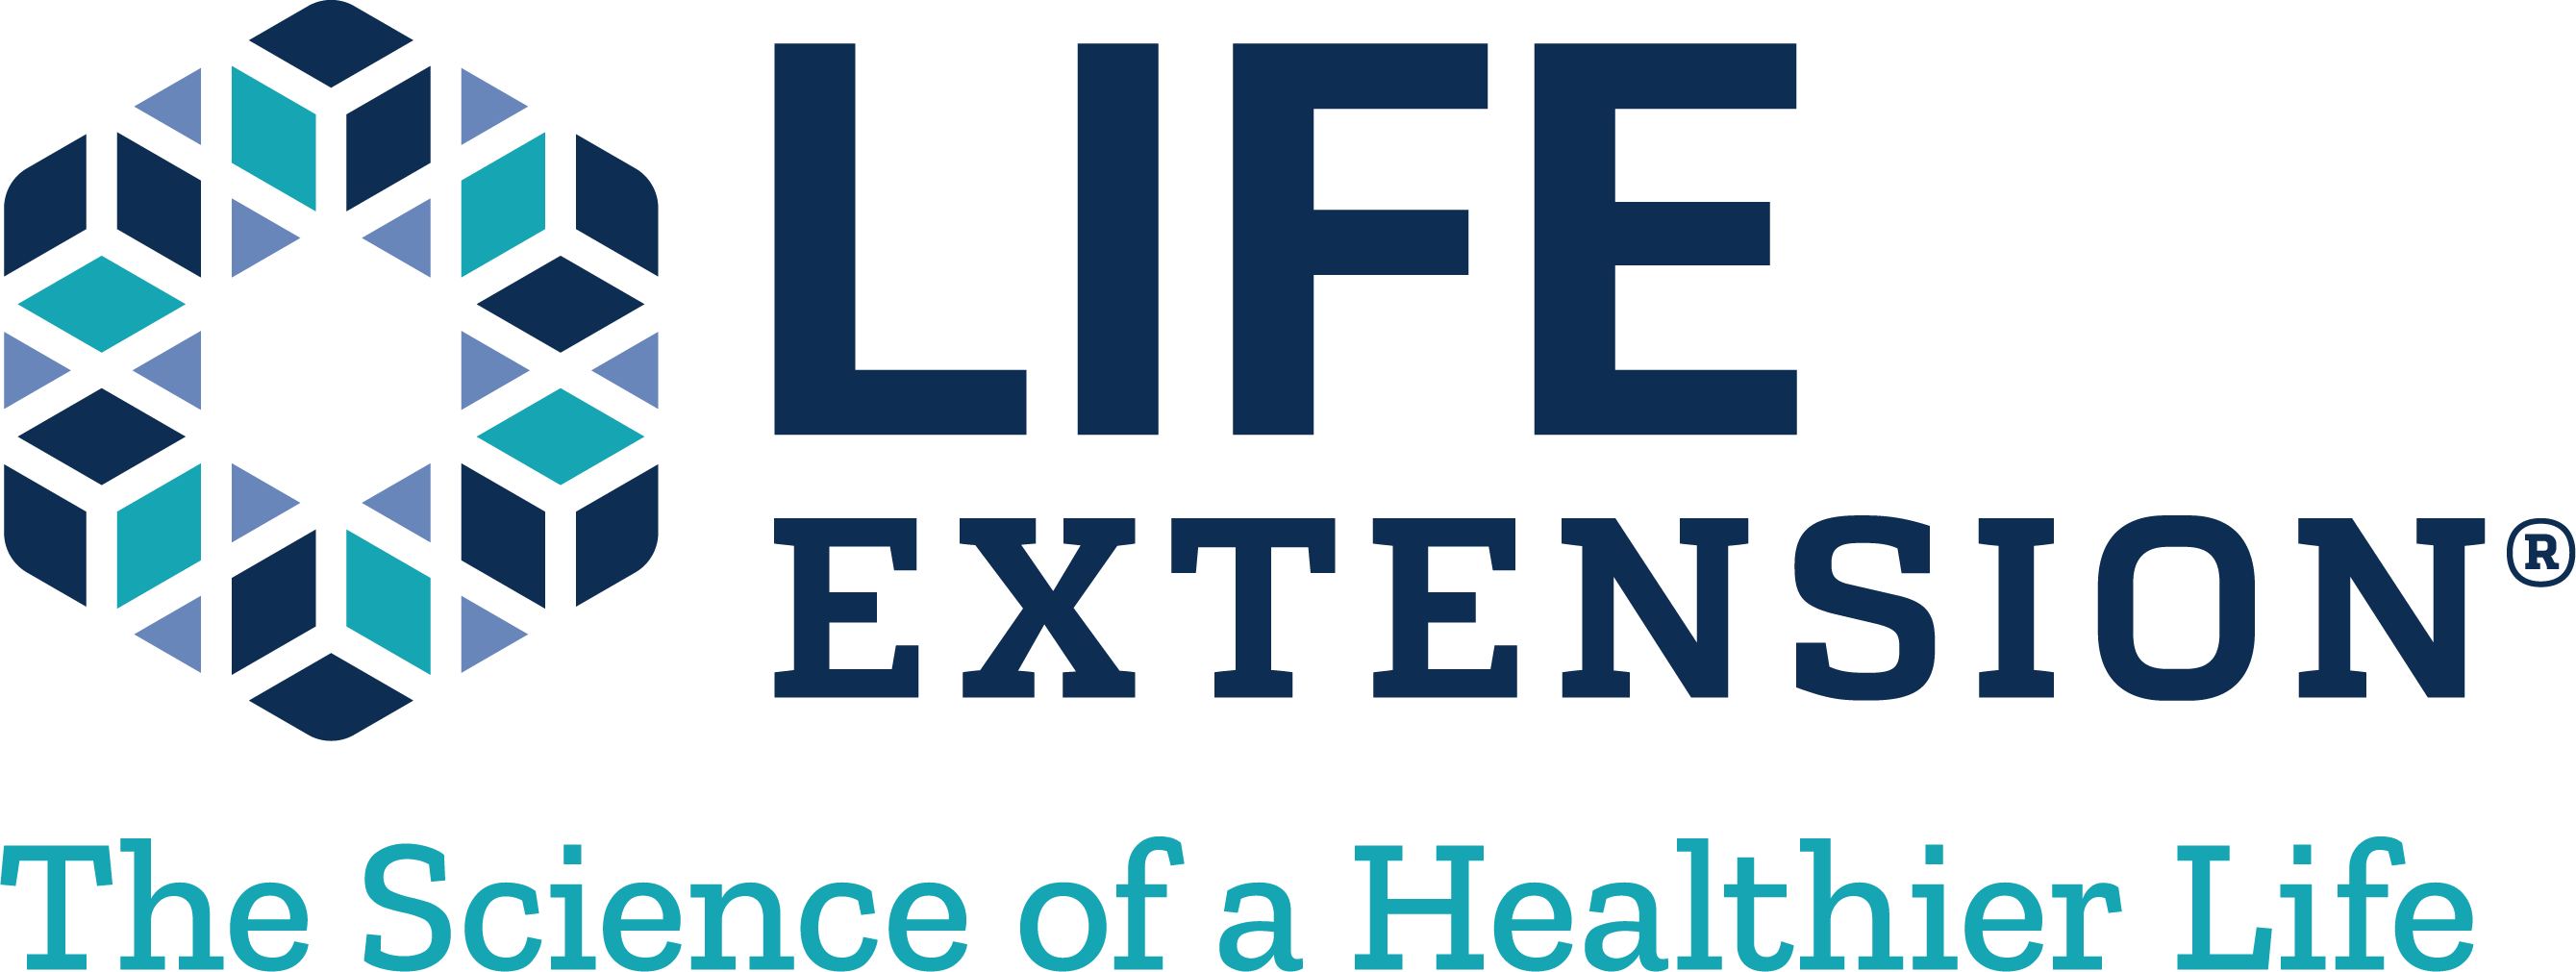 For 40 years, Life Extension has pursued innovative advances in health, conducting rigorous clinical trials and setting some of the most demanding standards in the industry to offer a full range of quality vitamins and nutritional supplements and blood-testing services. Life Extension’s Wellness Specialists provide personalized counsel to help customers choose the right products for optimal health, nutrition and personal care. To learn more, visit LifeExtension.com.